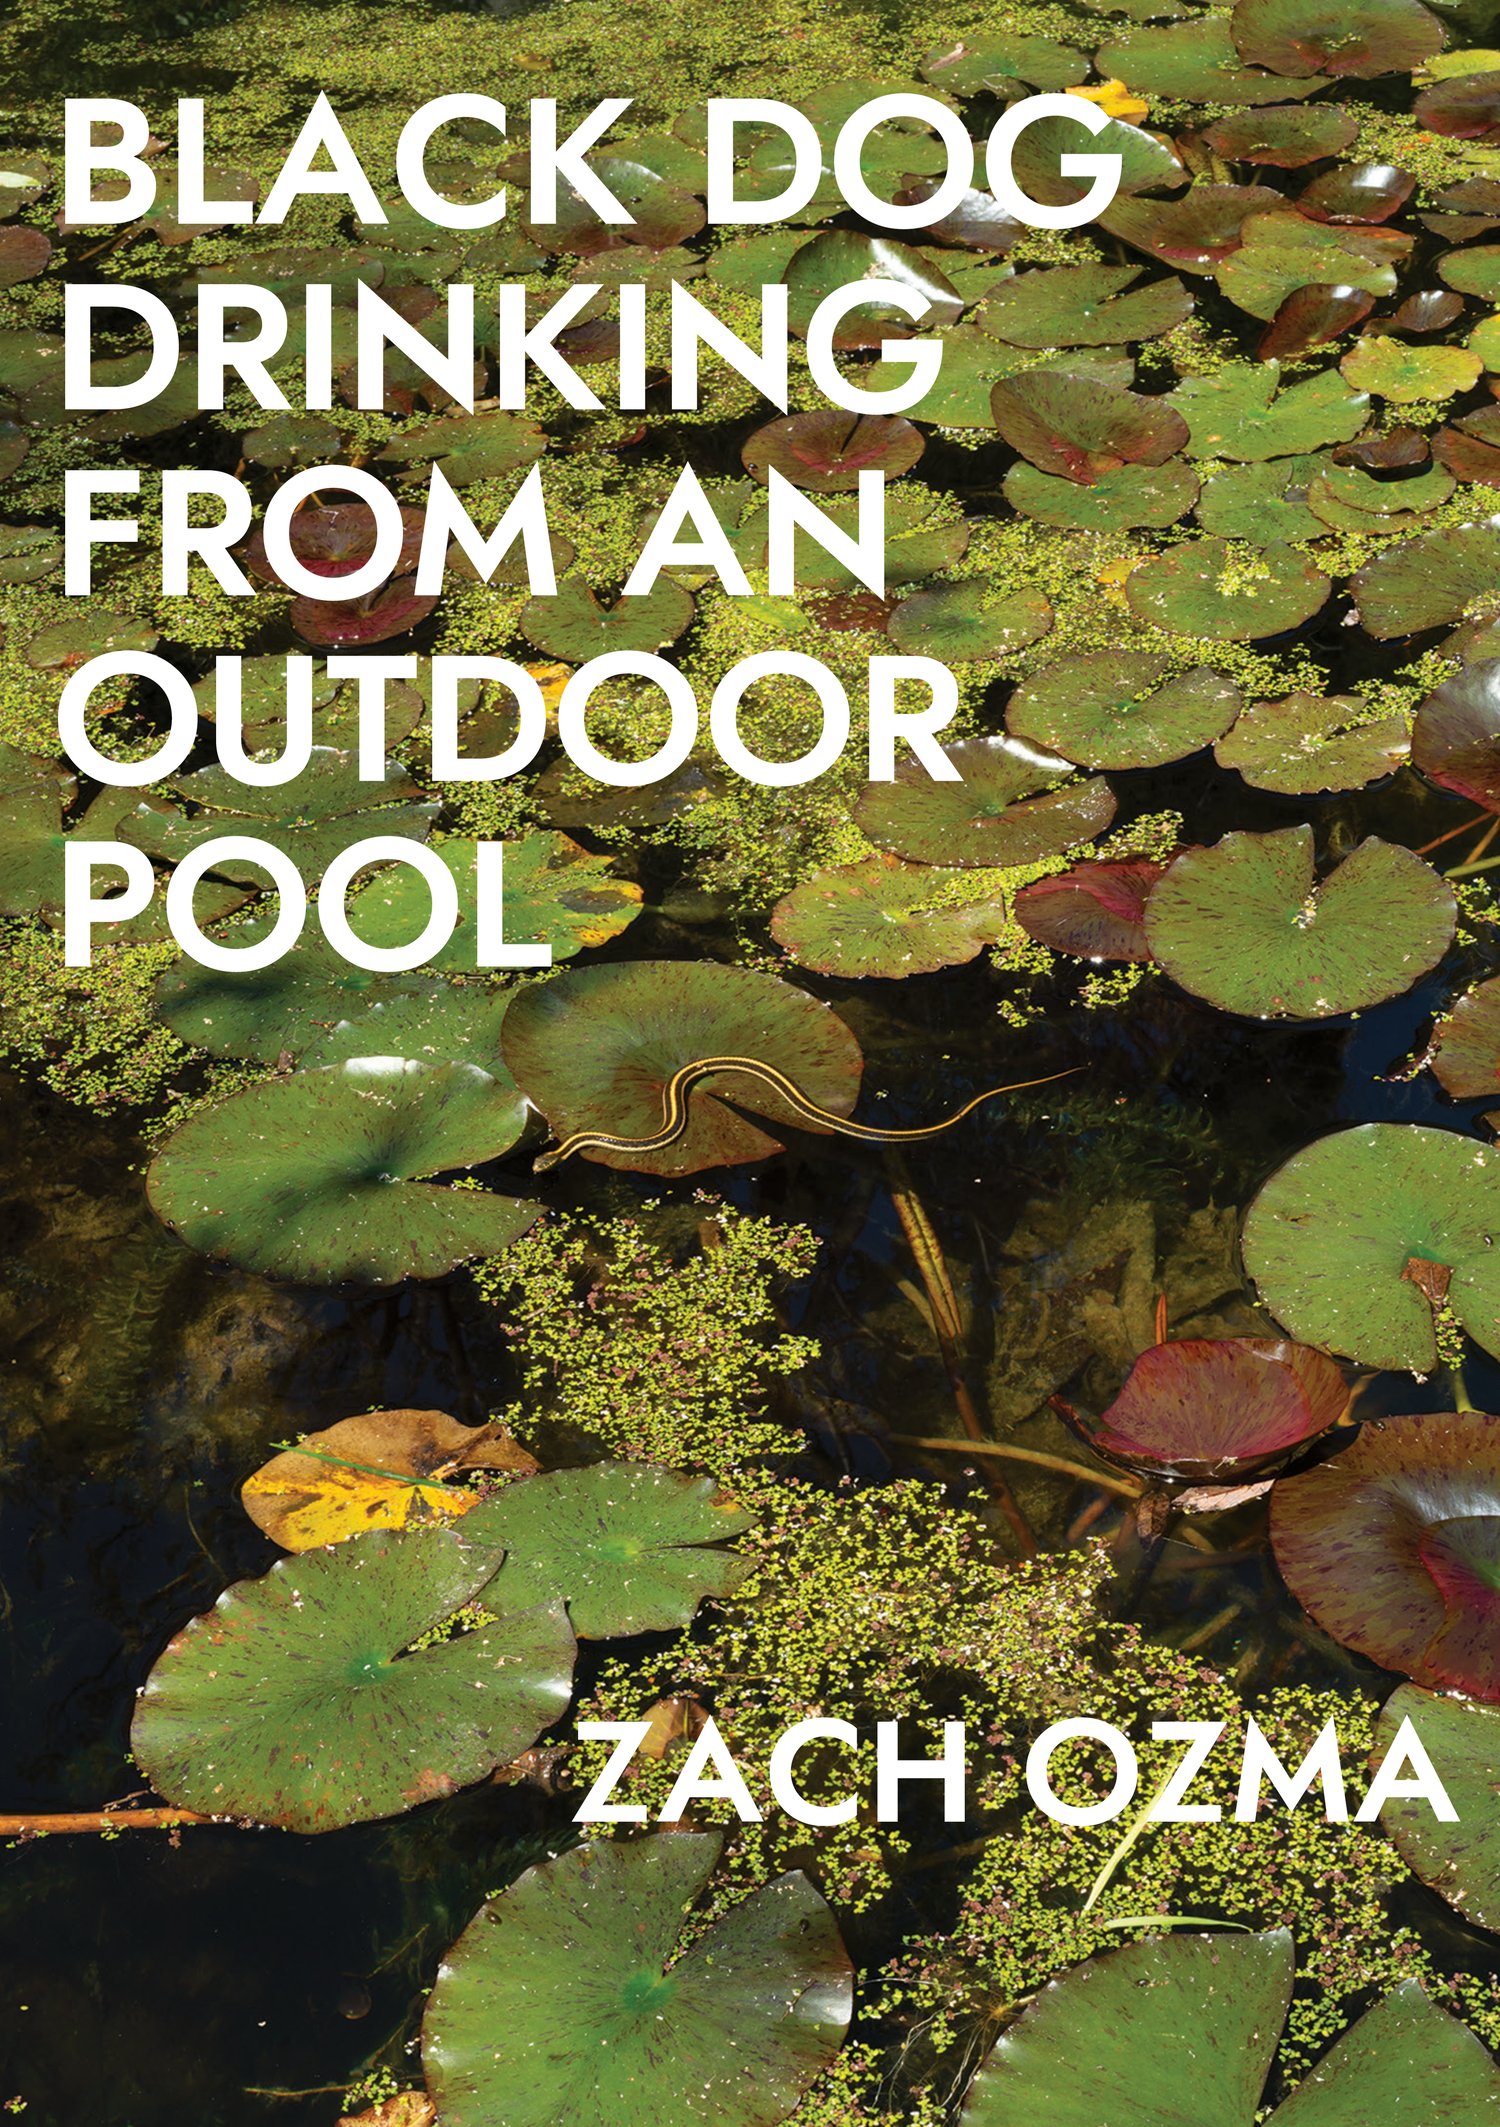 Image of Black Dog Drinking from an Outdoor Pool by Zach Ozma